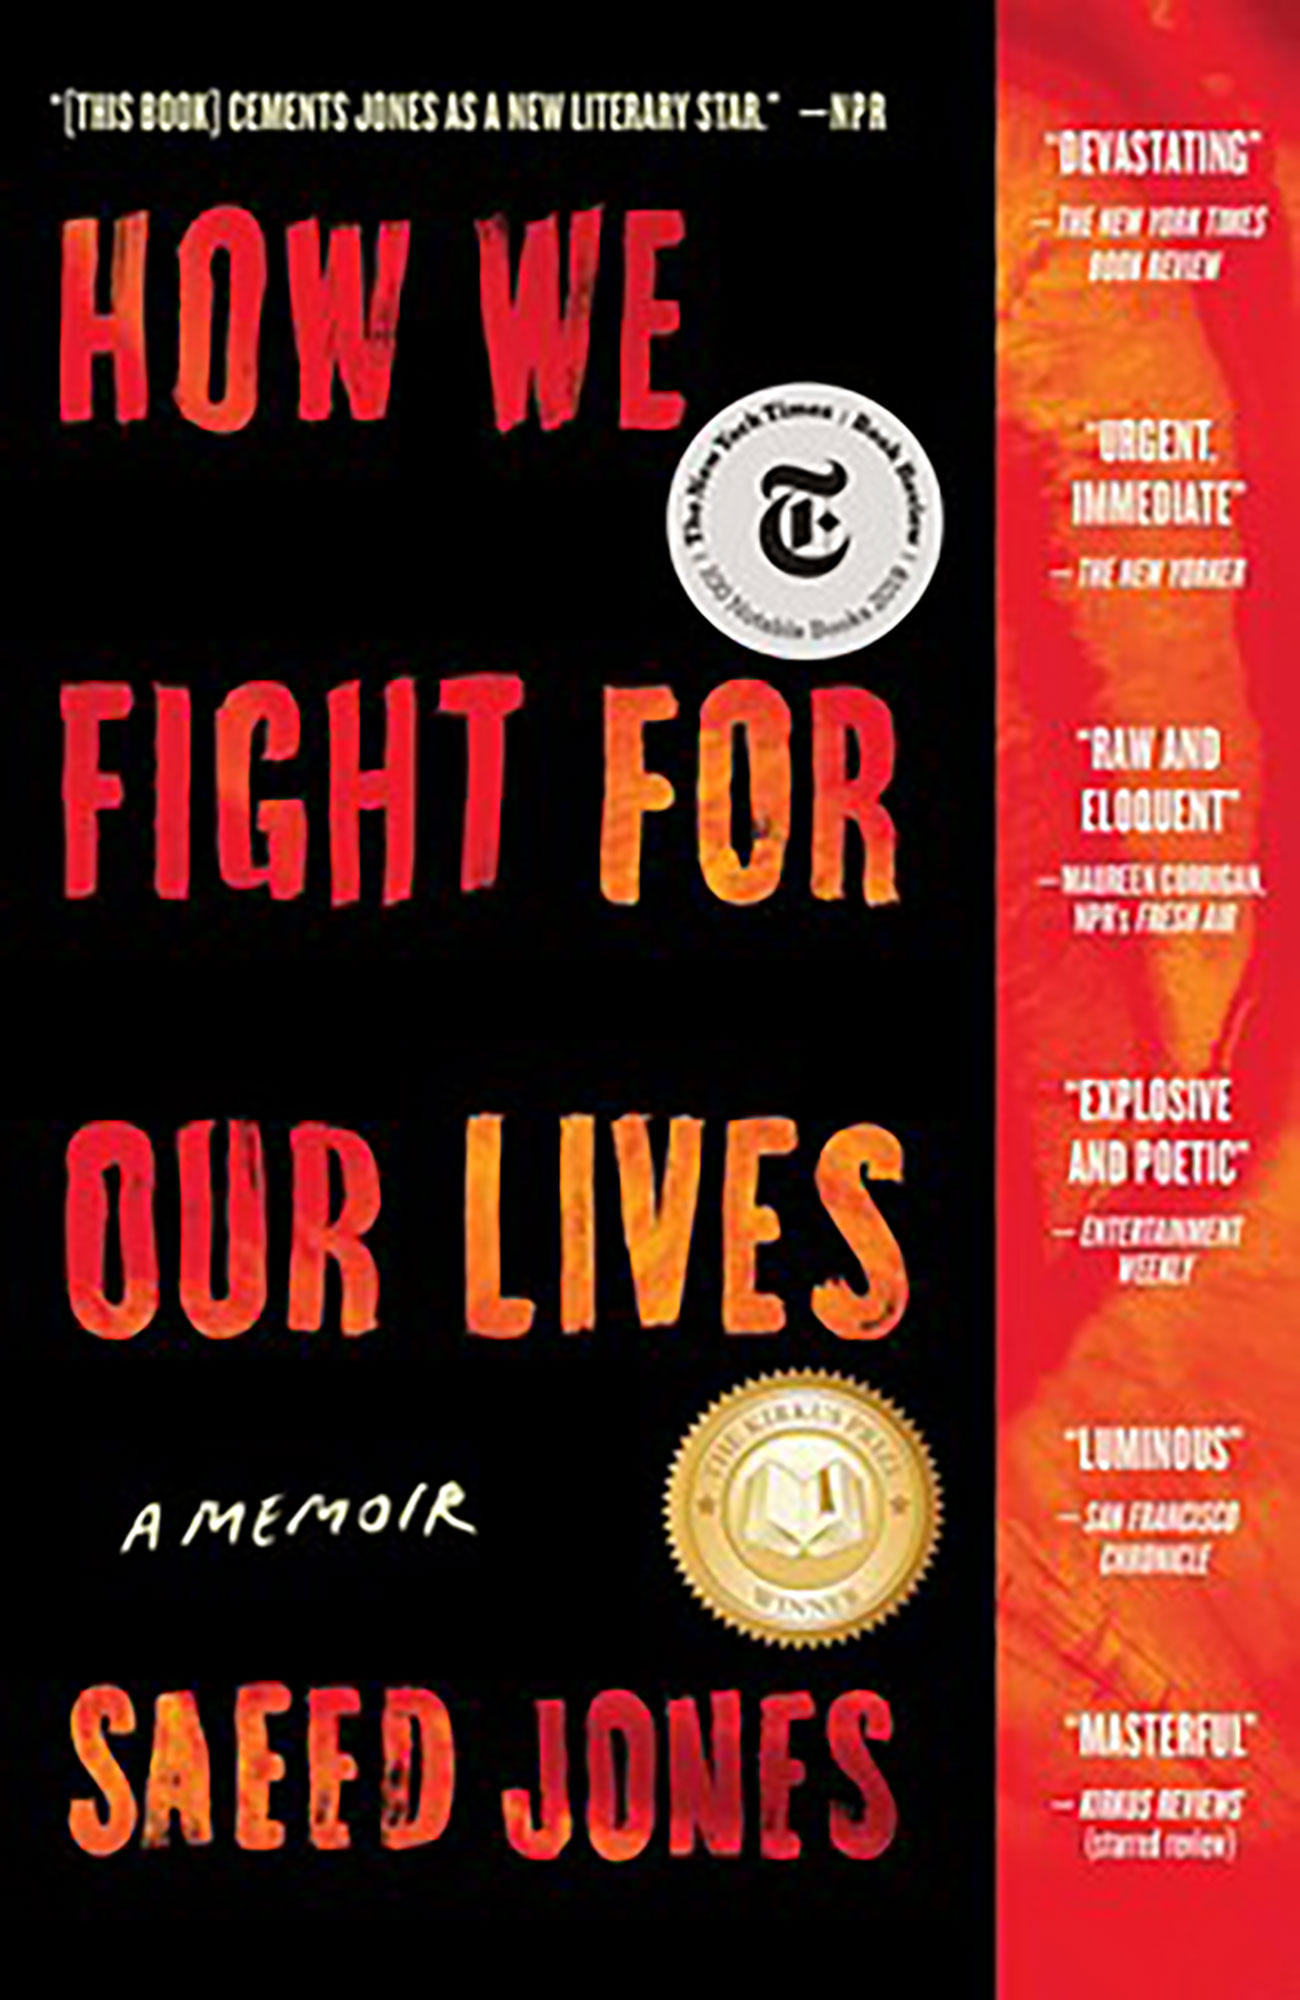 COVERL Black background with text "How We Fight For Our Lives: A Novel" along with the author's name down the whole cover. There is a red rectangle down the right side. Book cover courtesy of Simon & Schuster publishers. SOURCE: https://www.simonandschuster.com/books/How-We-Fight-for-Our-Lives/Saeed-Jones/9781501132742#:~:text=Introduction-,Haunted%20and%20haunting%2C%20How%20We%20Fight%20for%20Our%20Lives%20is,hopes%2C%20desires%2C%20and%20fears.